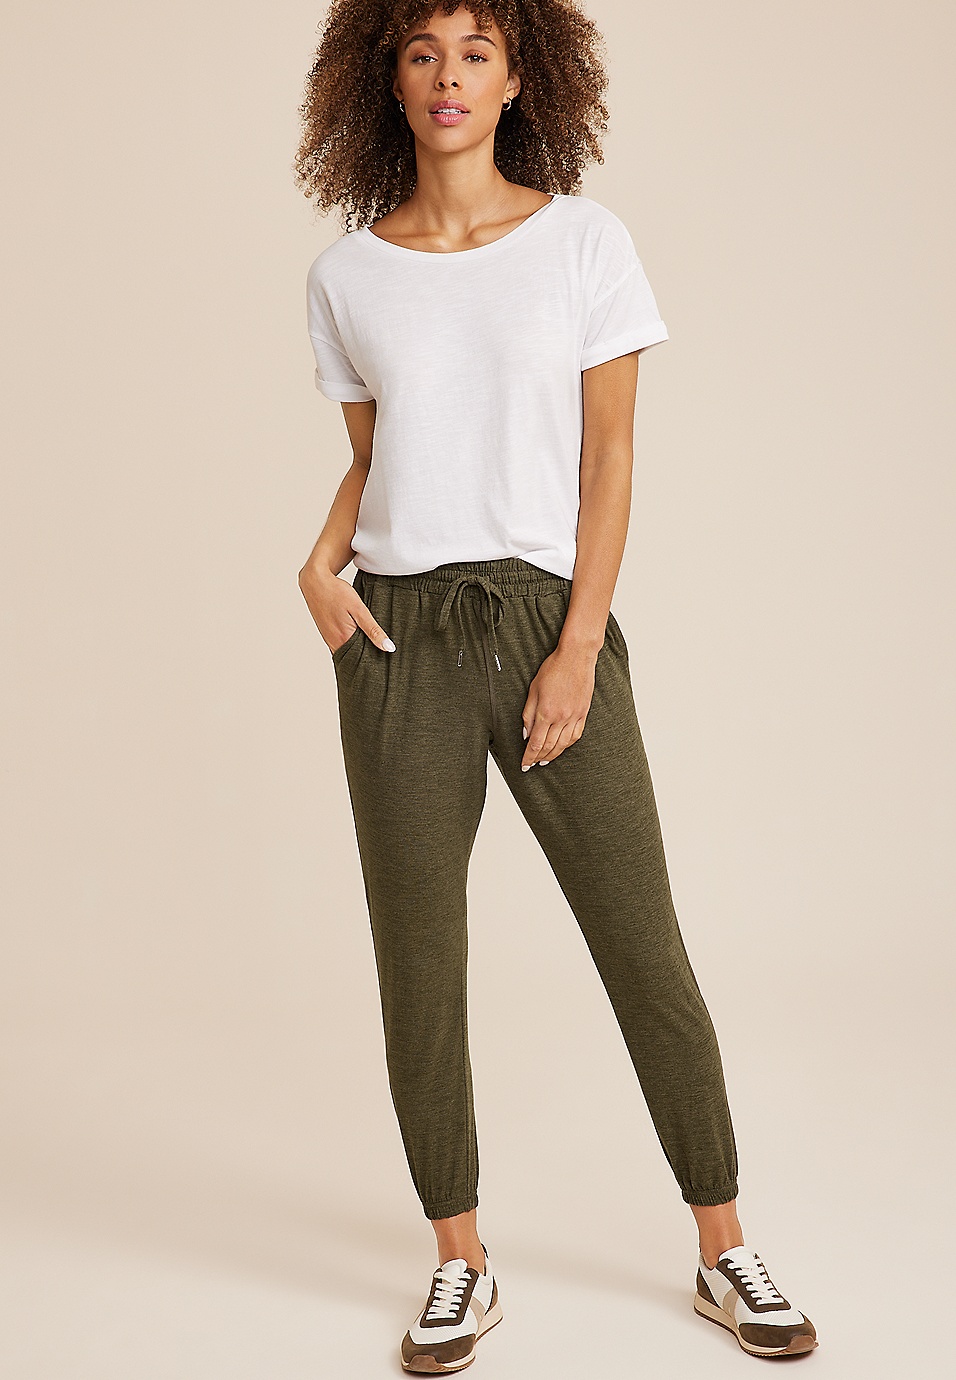 How to style high-waisted Jogging pants